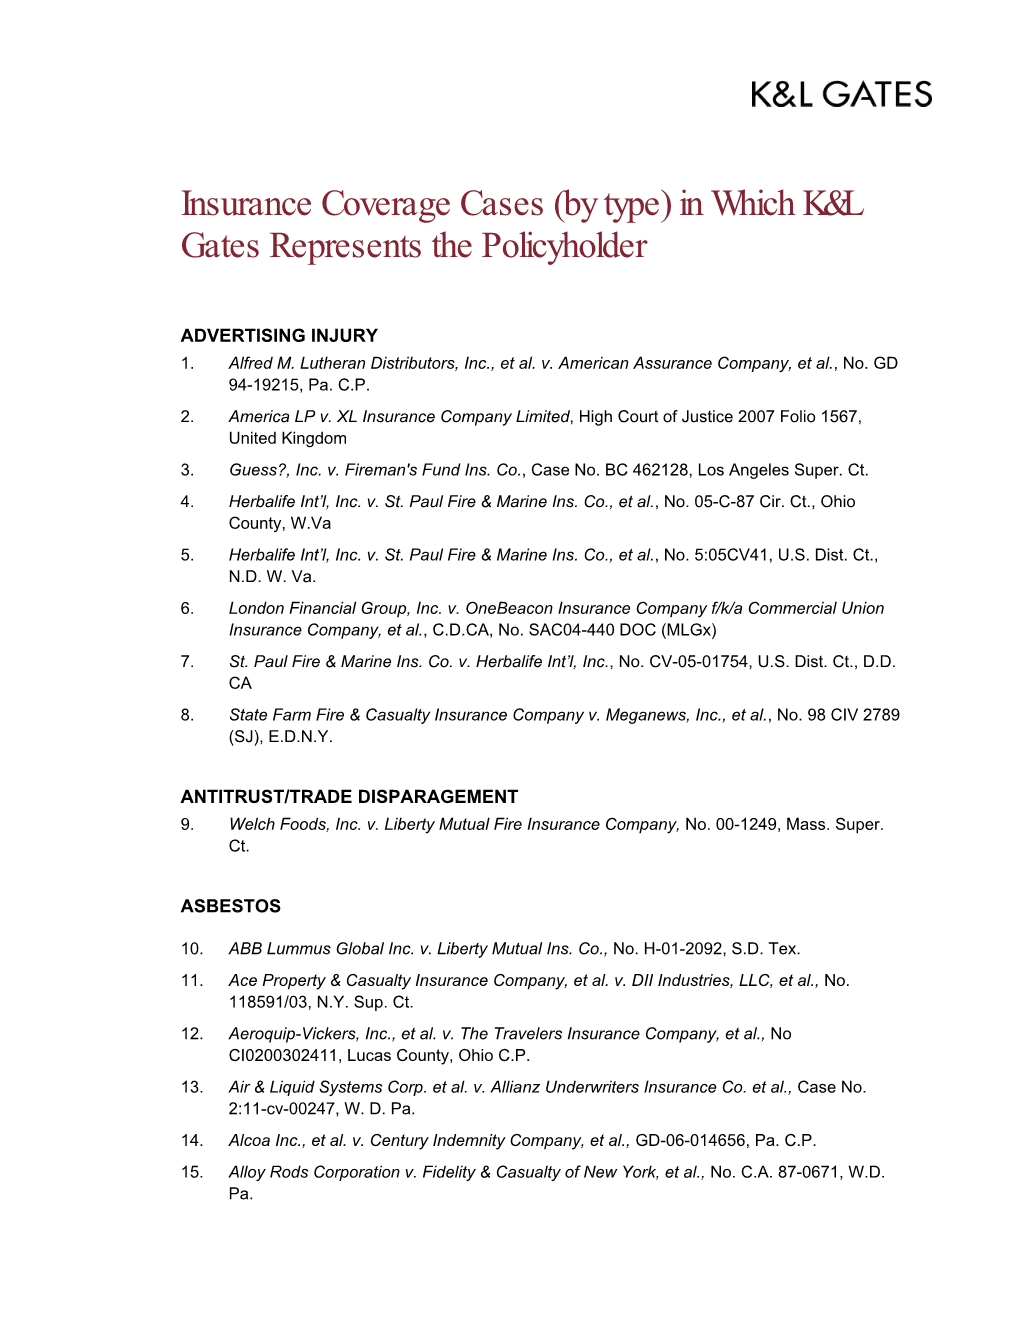 Insurance Coverage Cases (By Type) in Which K&L Gates Represents The